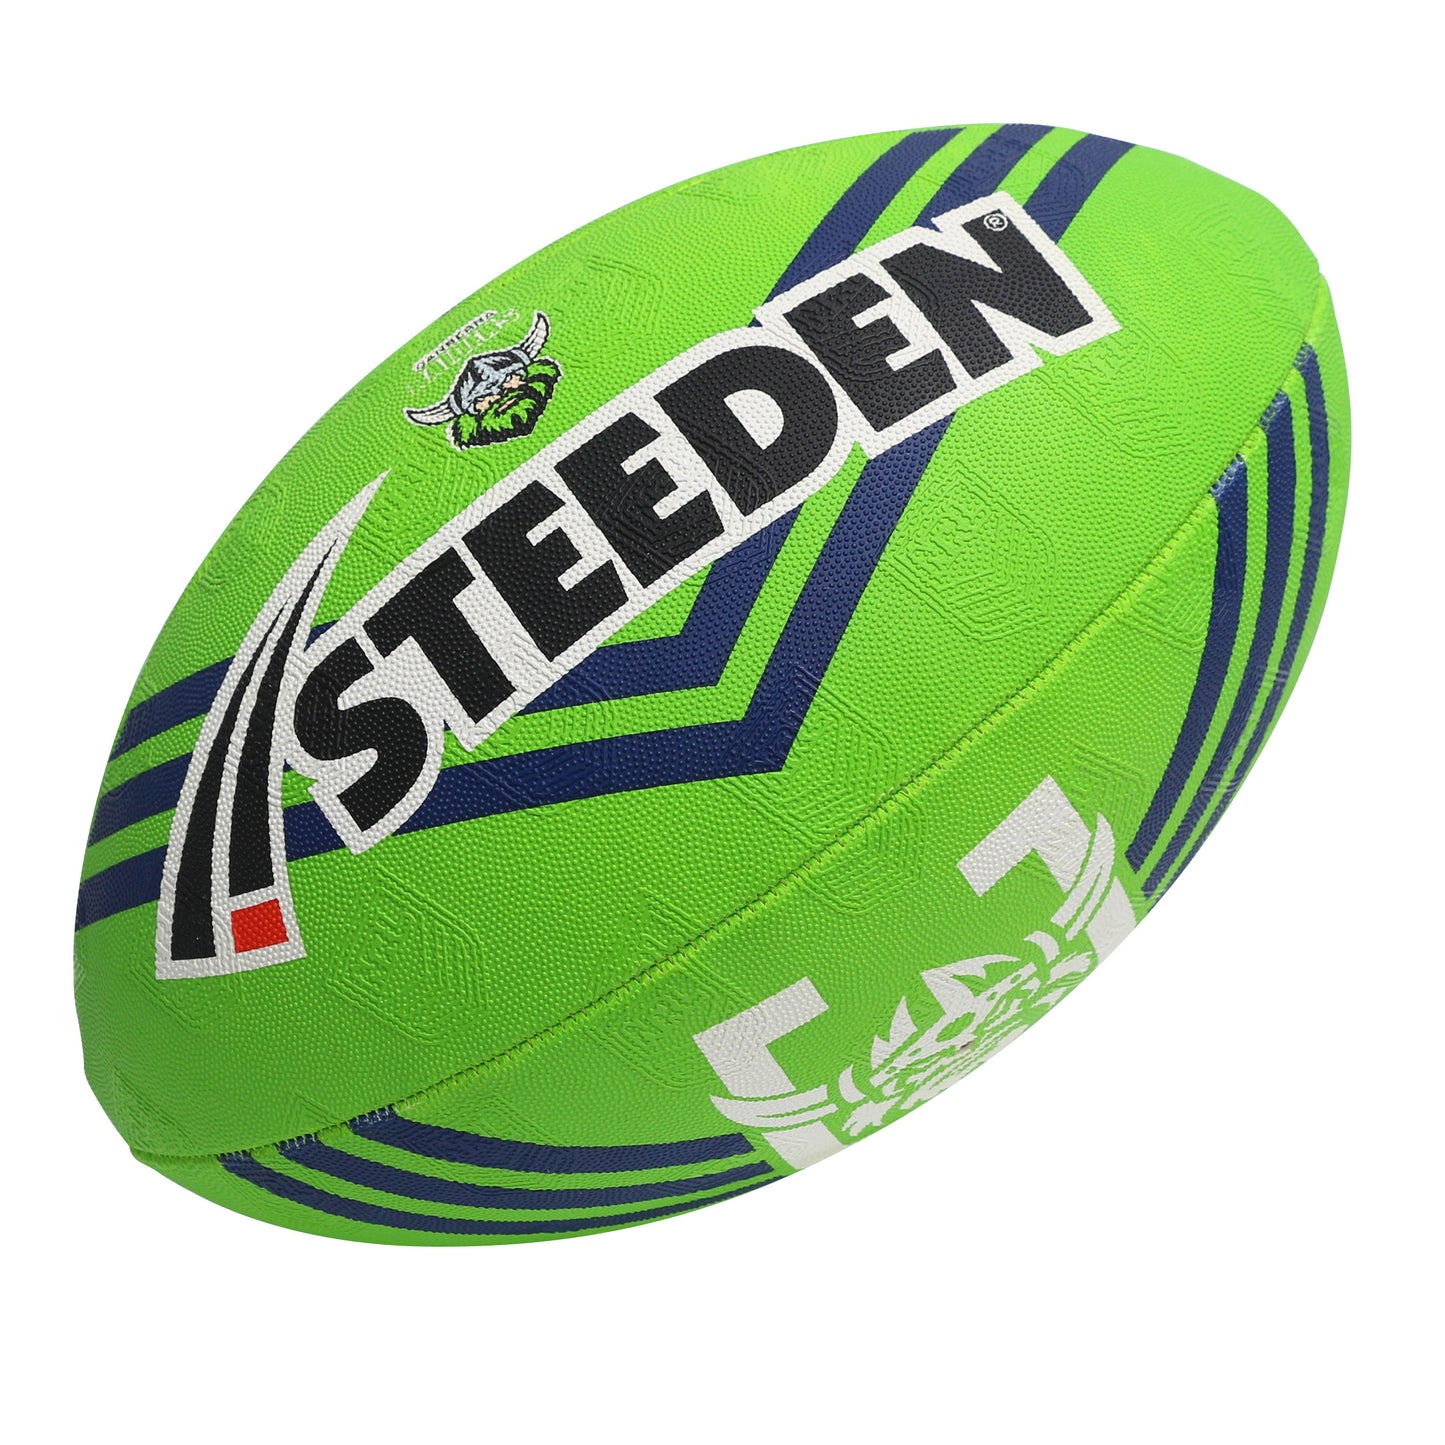 NRL Raiders Supporter Ball (11 inch)